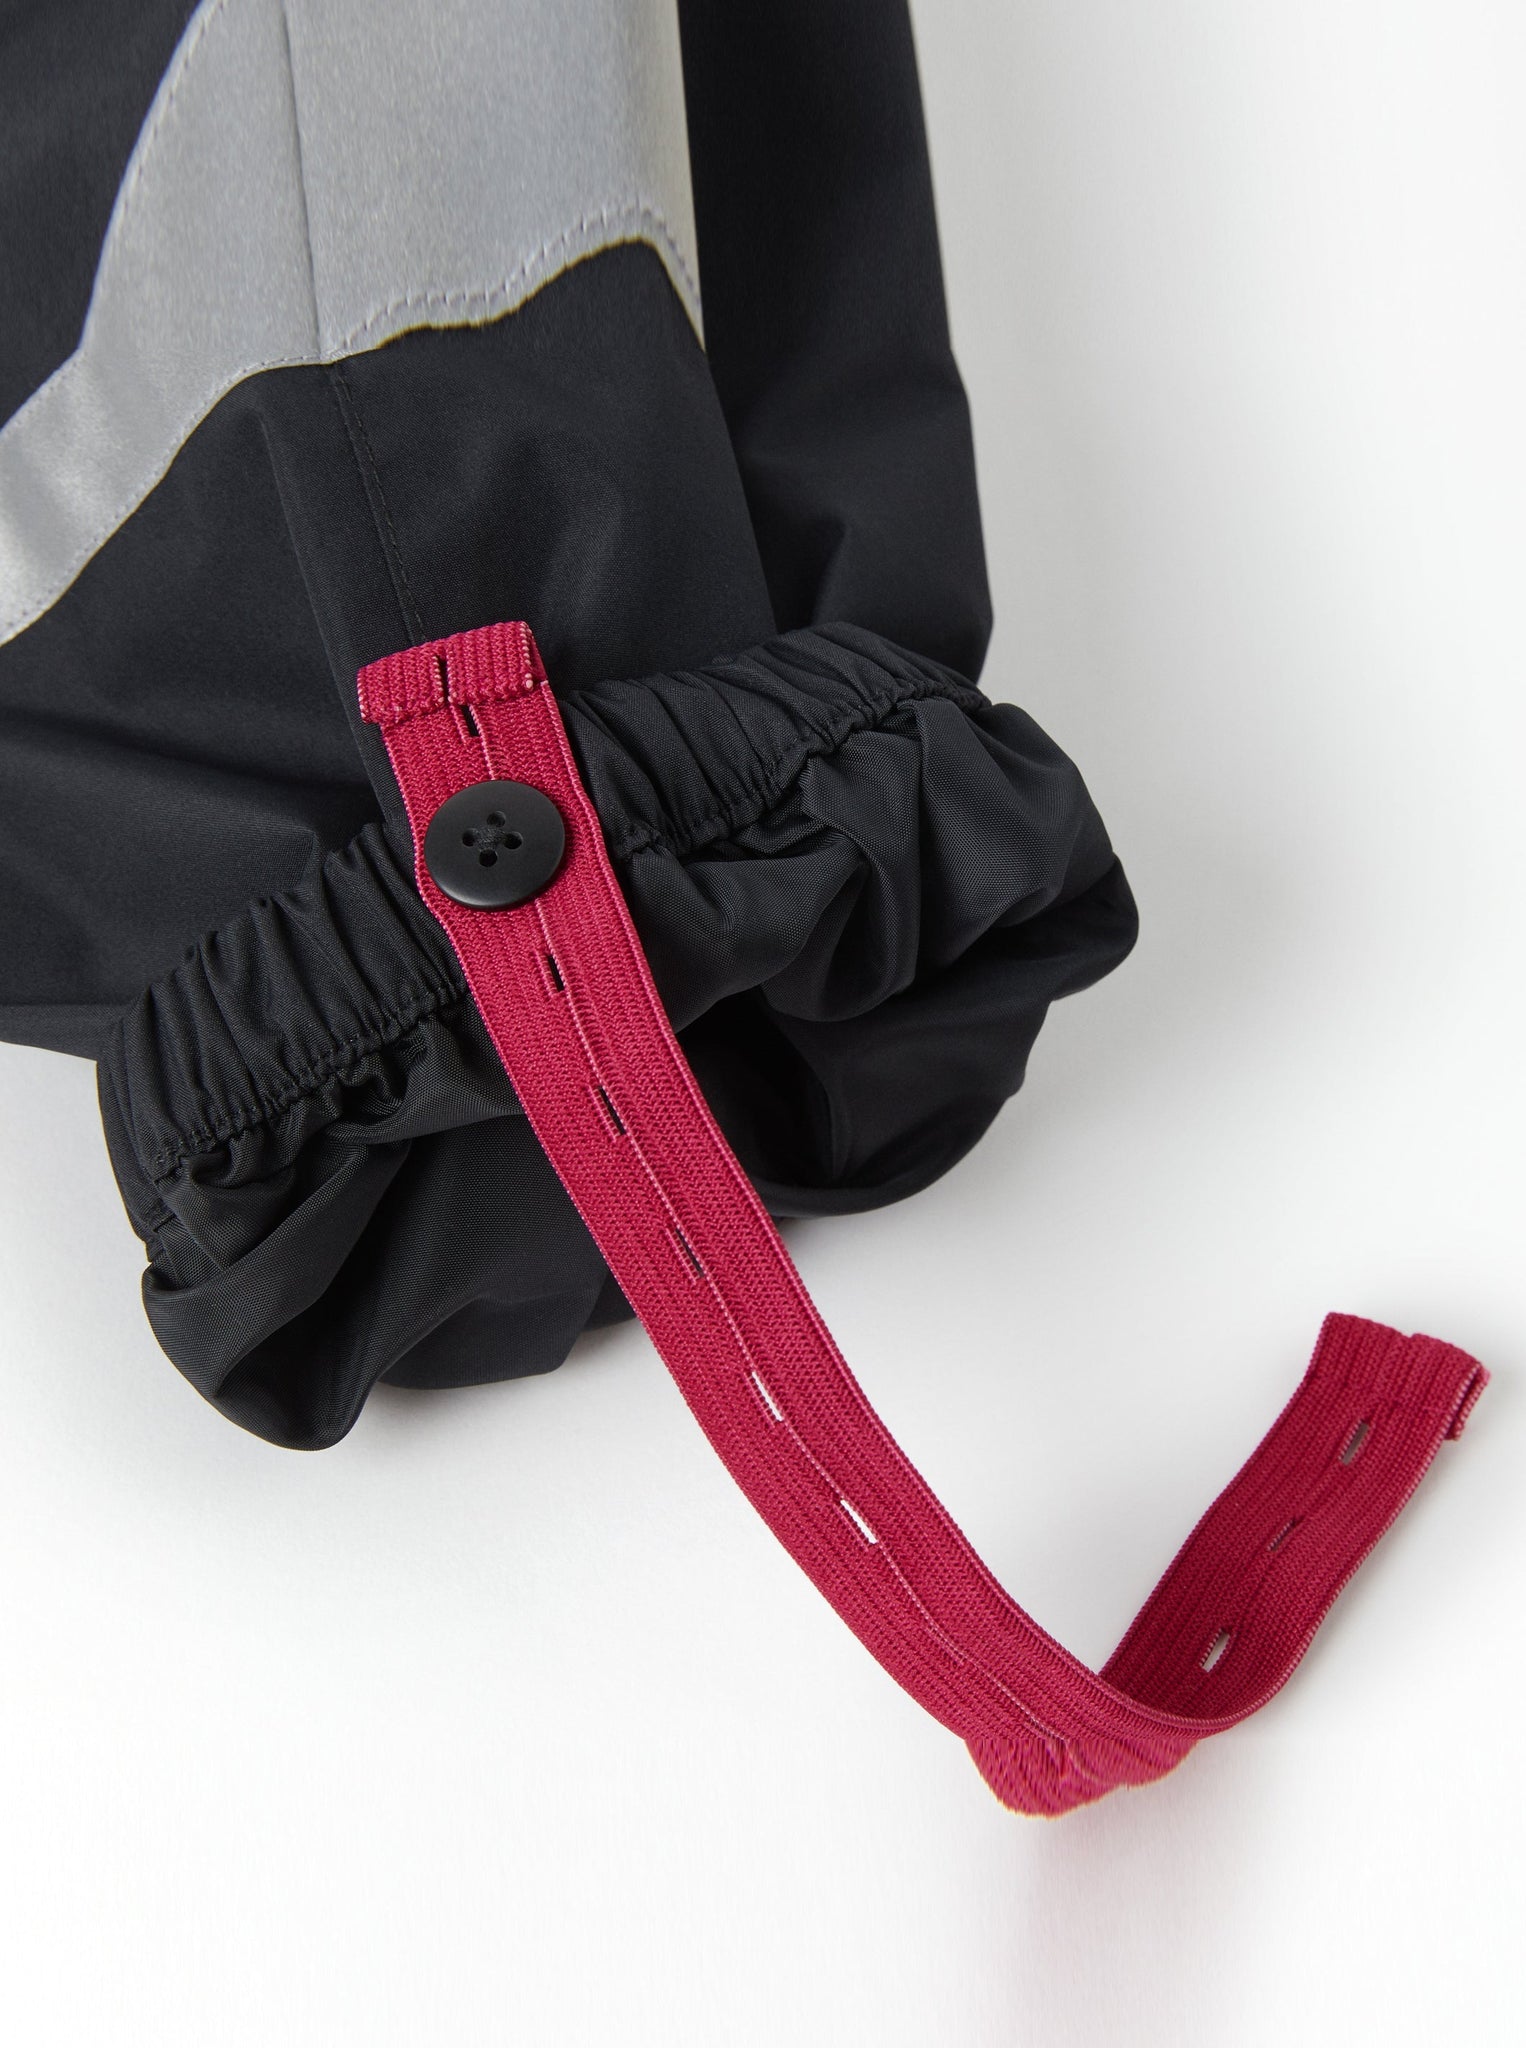 Replacement Waterproof Trouser Stirrup from the Polarn O. Pyret kidswear collection. Made using ethically sourced materials.